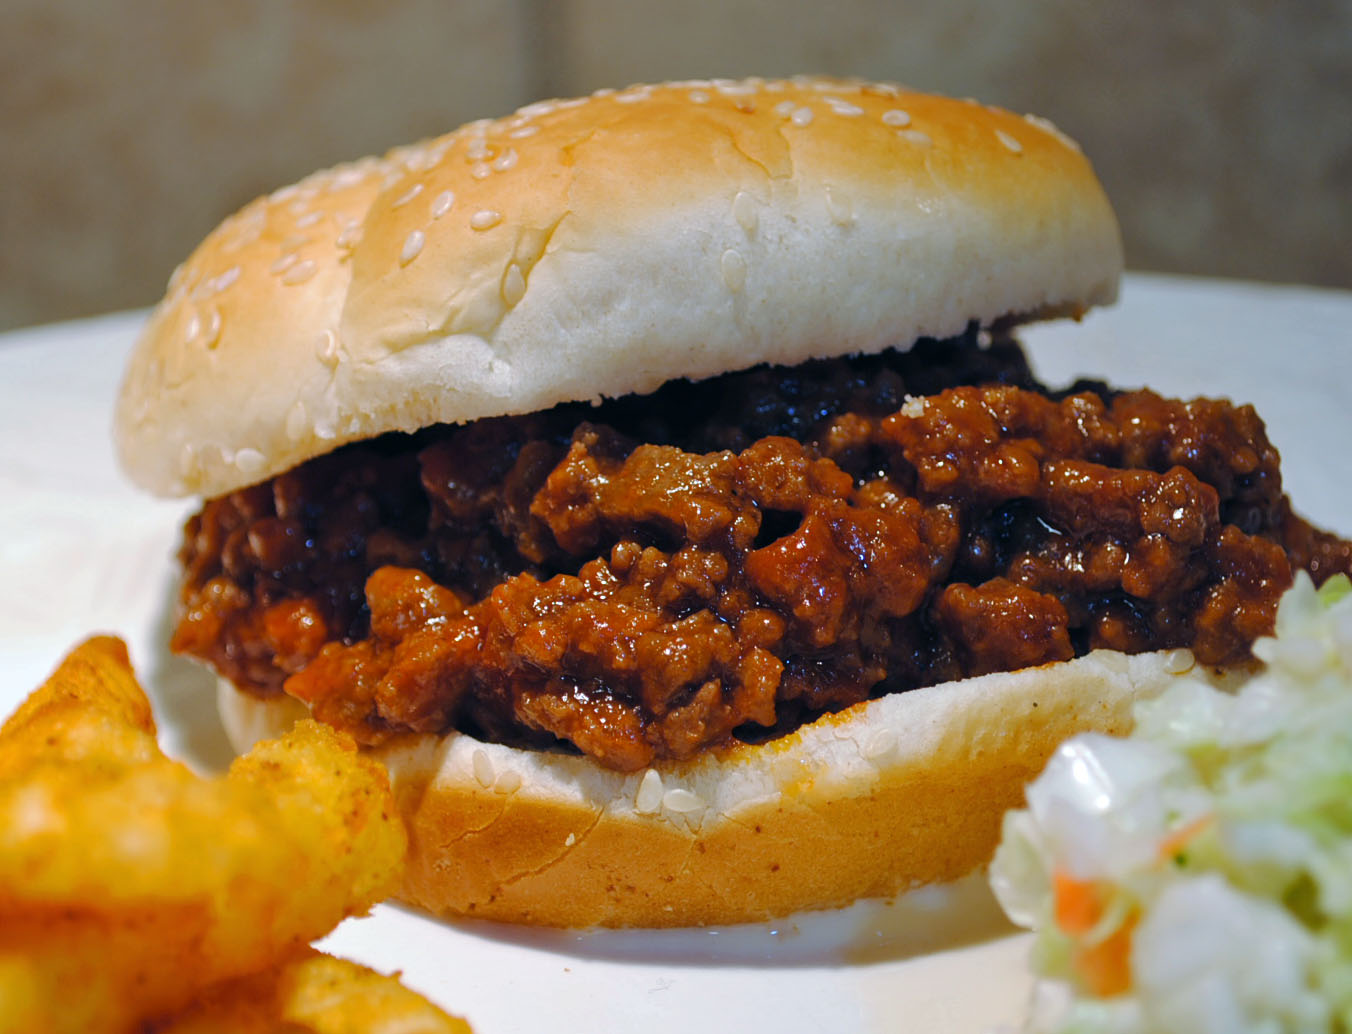 Home Matters: Sloppy Joes